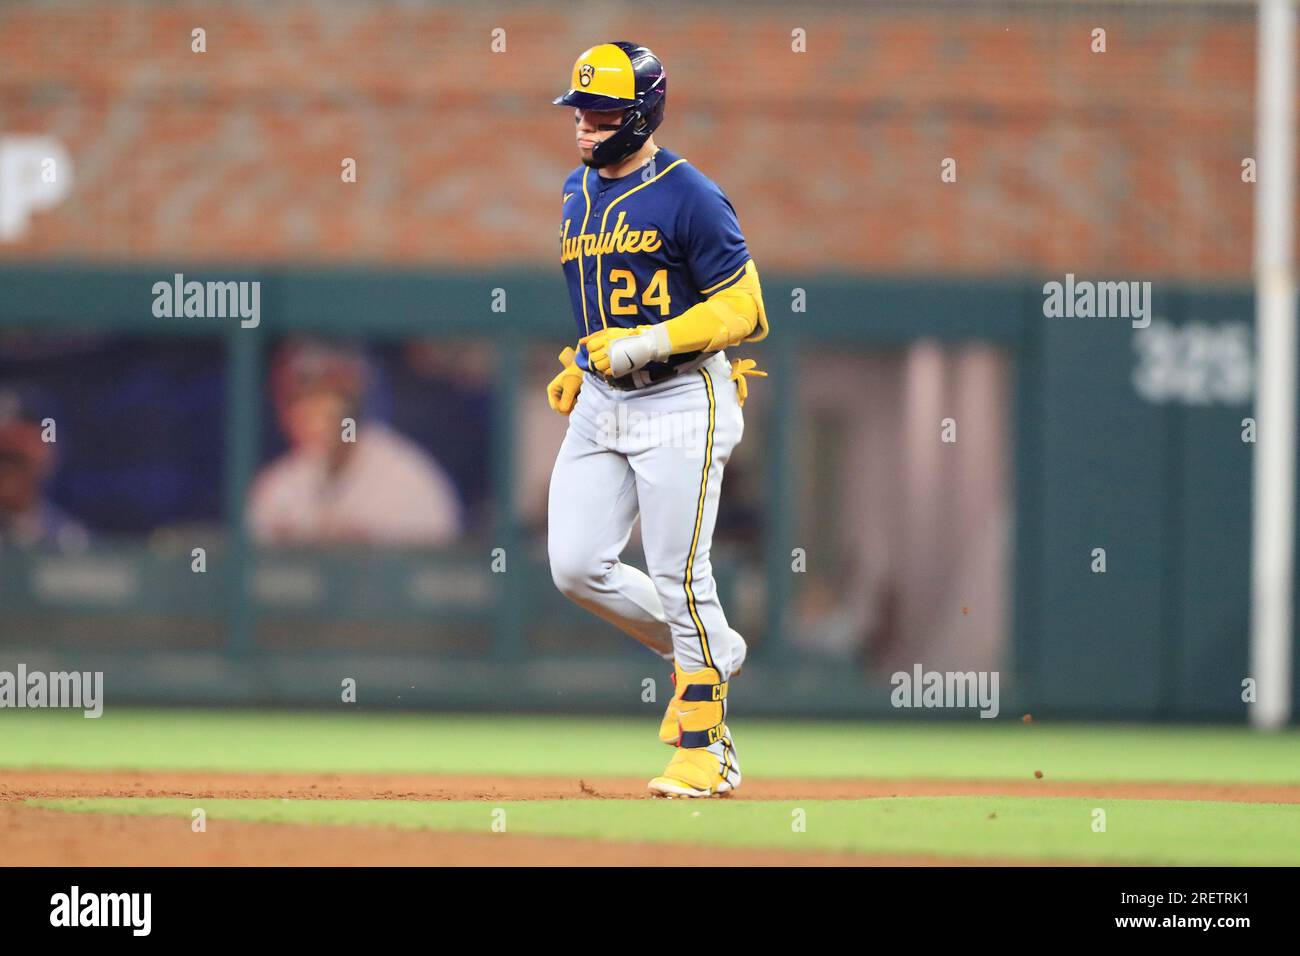 ATLANTA, GA - JULY 29: Milwaukee Brewers designated hitter and former Brave William  Contreras (24) circles the bases after hitting a home run in the 8th inning  during the Saturday evening MLB